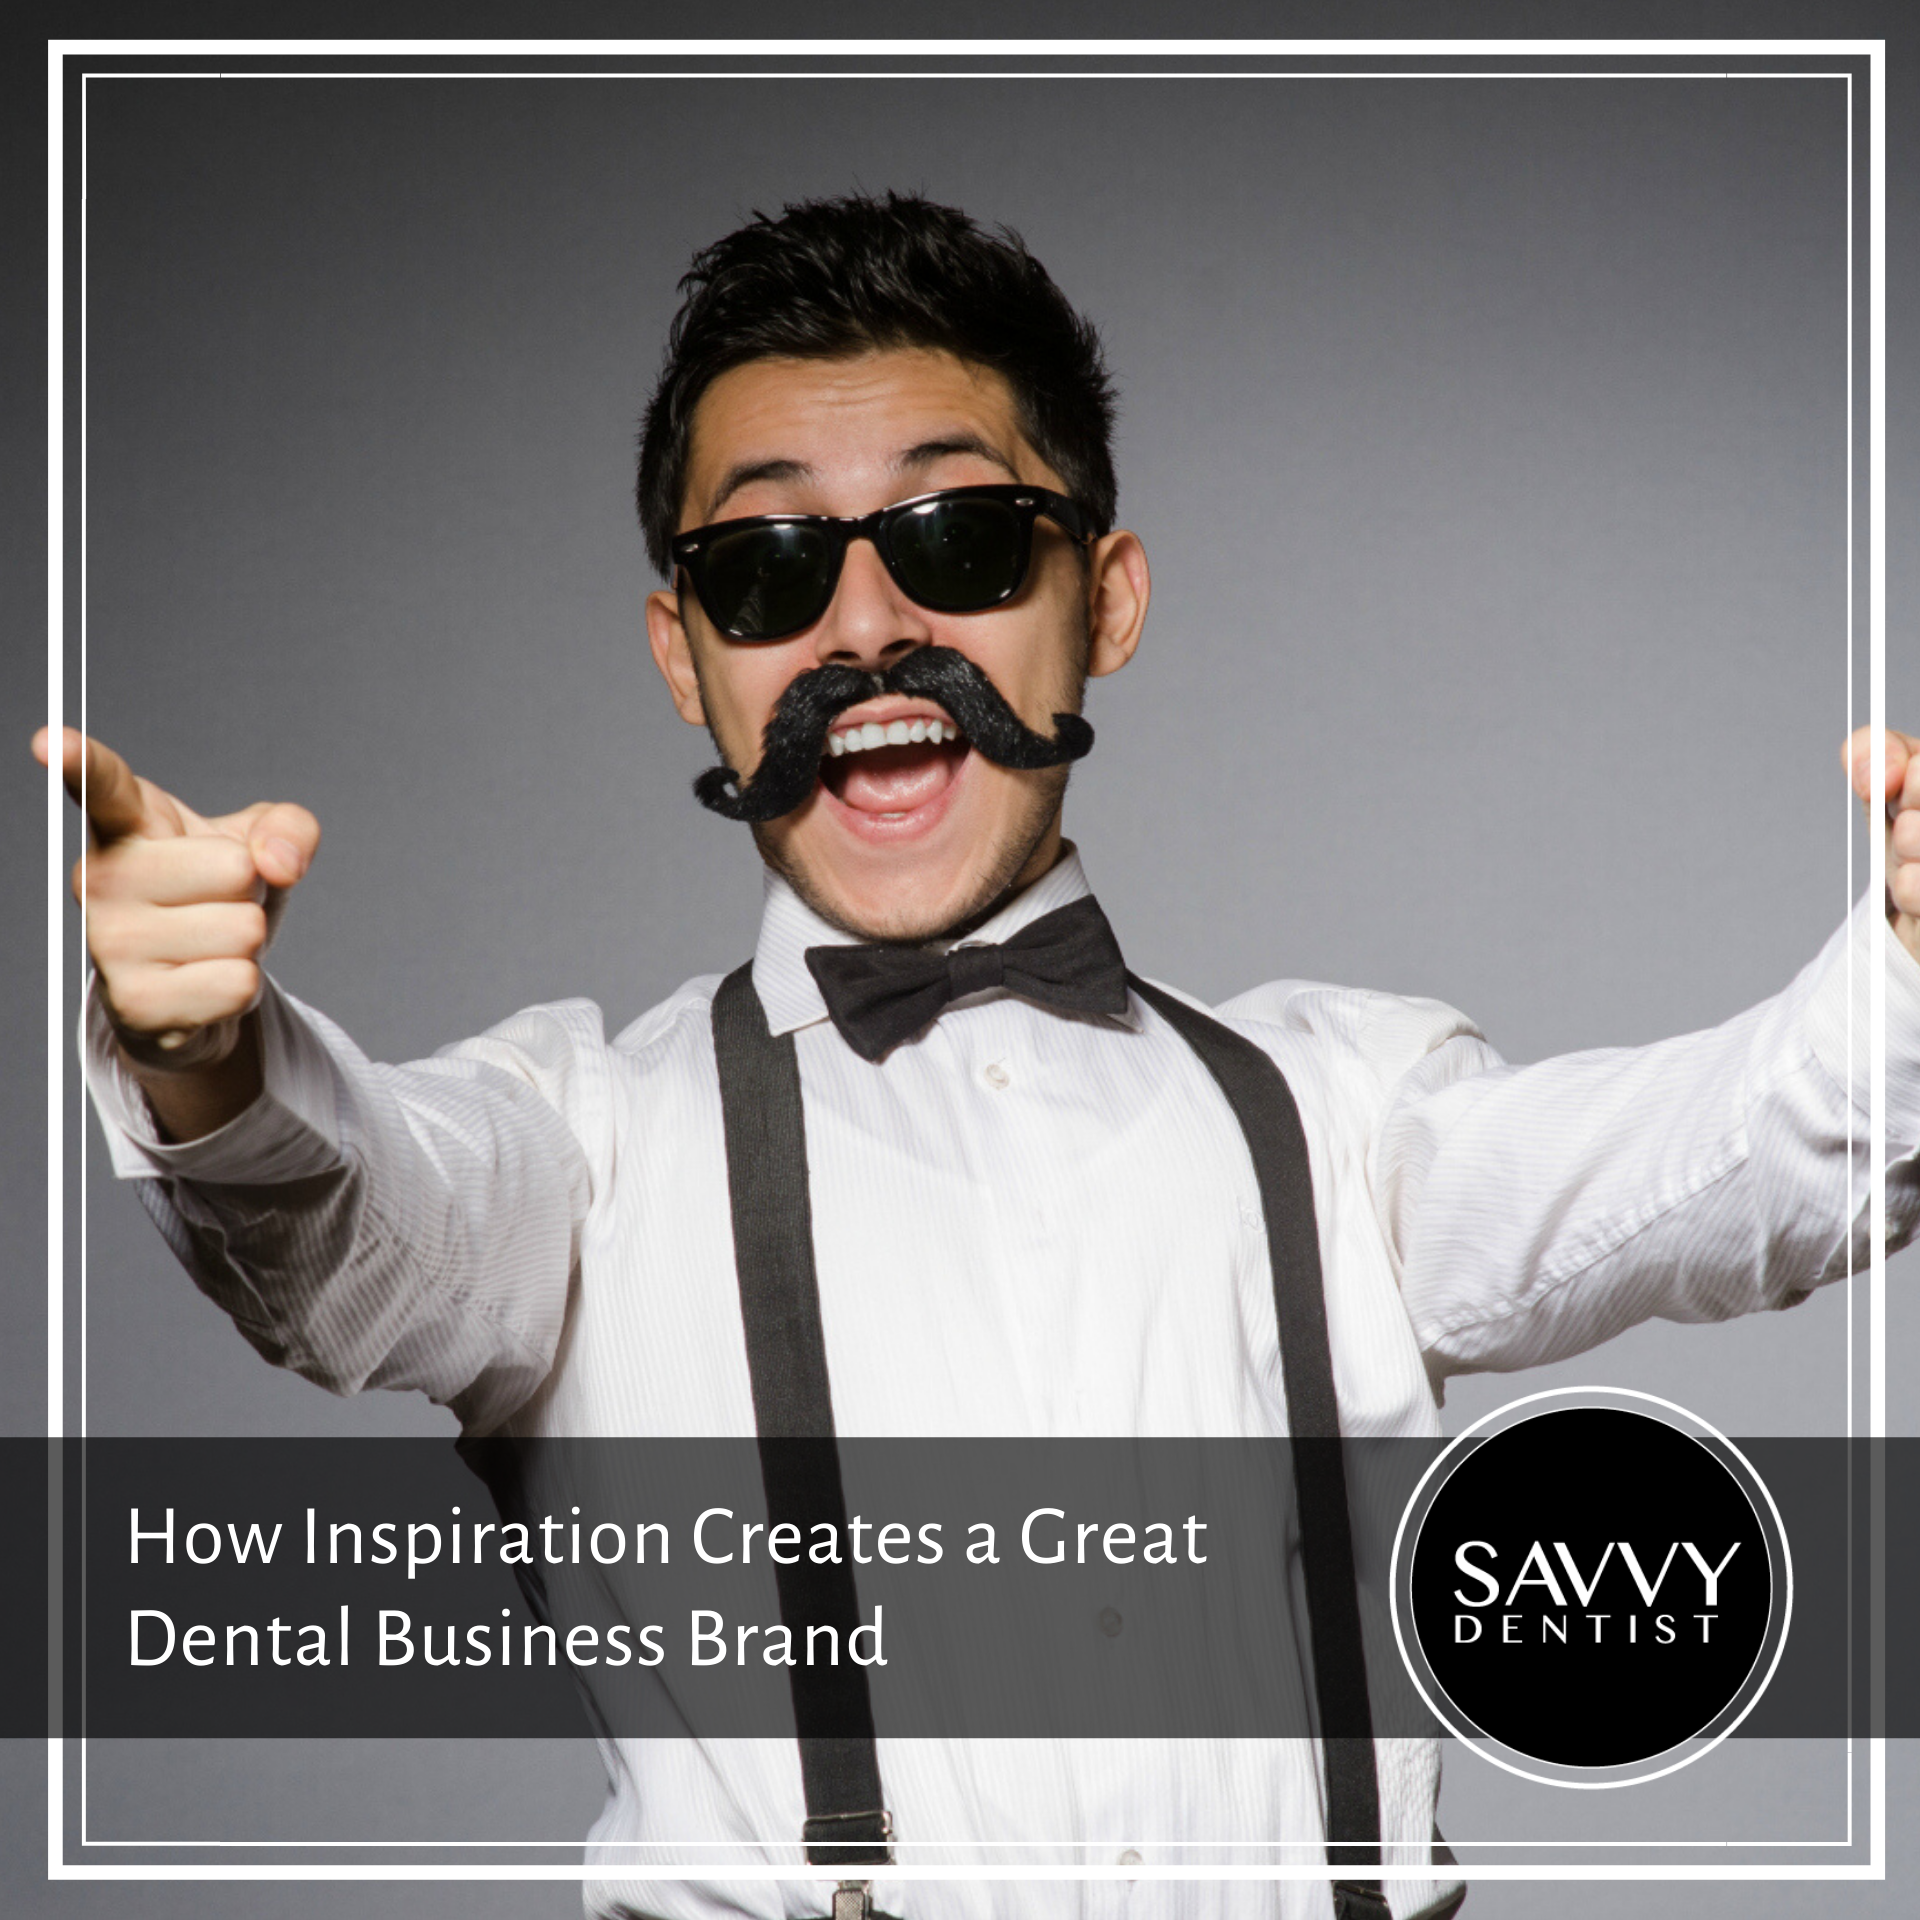 How Inspiration Creates a Great Dental Business Brand